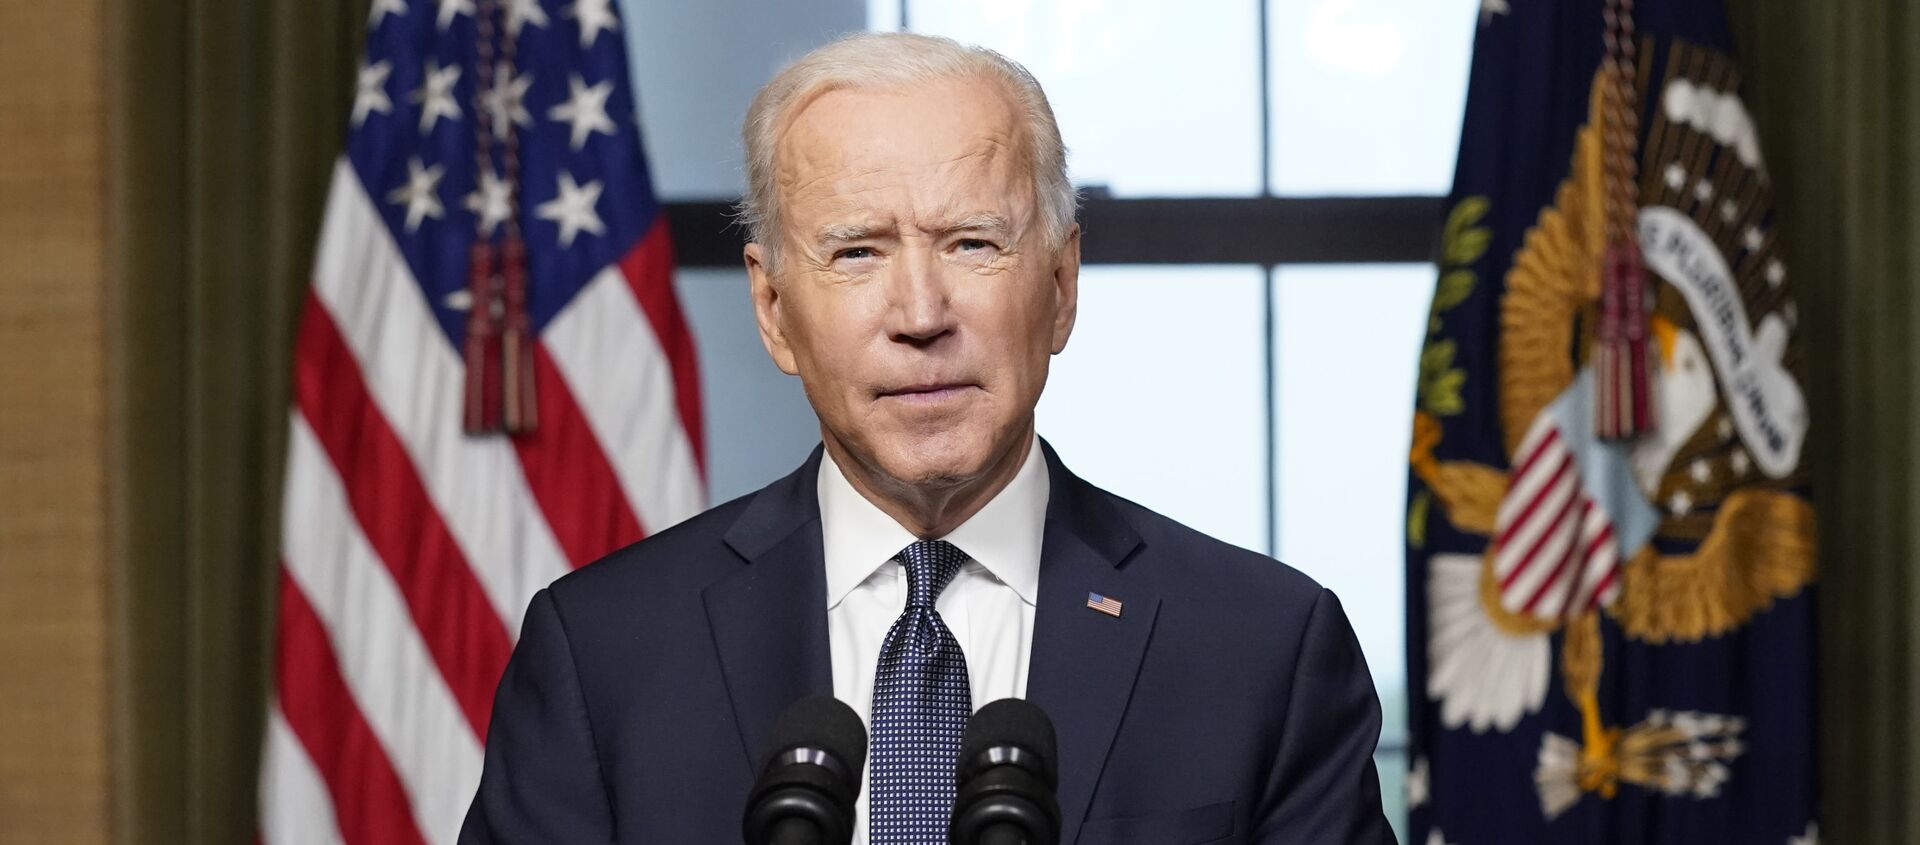 President Joe Biden speaks from the Treaty Room in the White House on Wednesday, April 14, 2021, about the withdrawal of the remainder of U.S. troops from Afghanistan. - Sputnik International, 1920, 14.04.2021